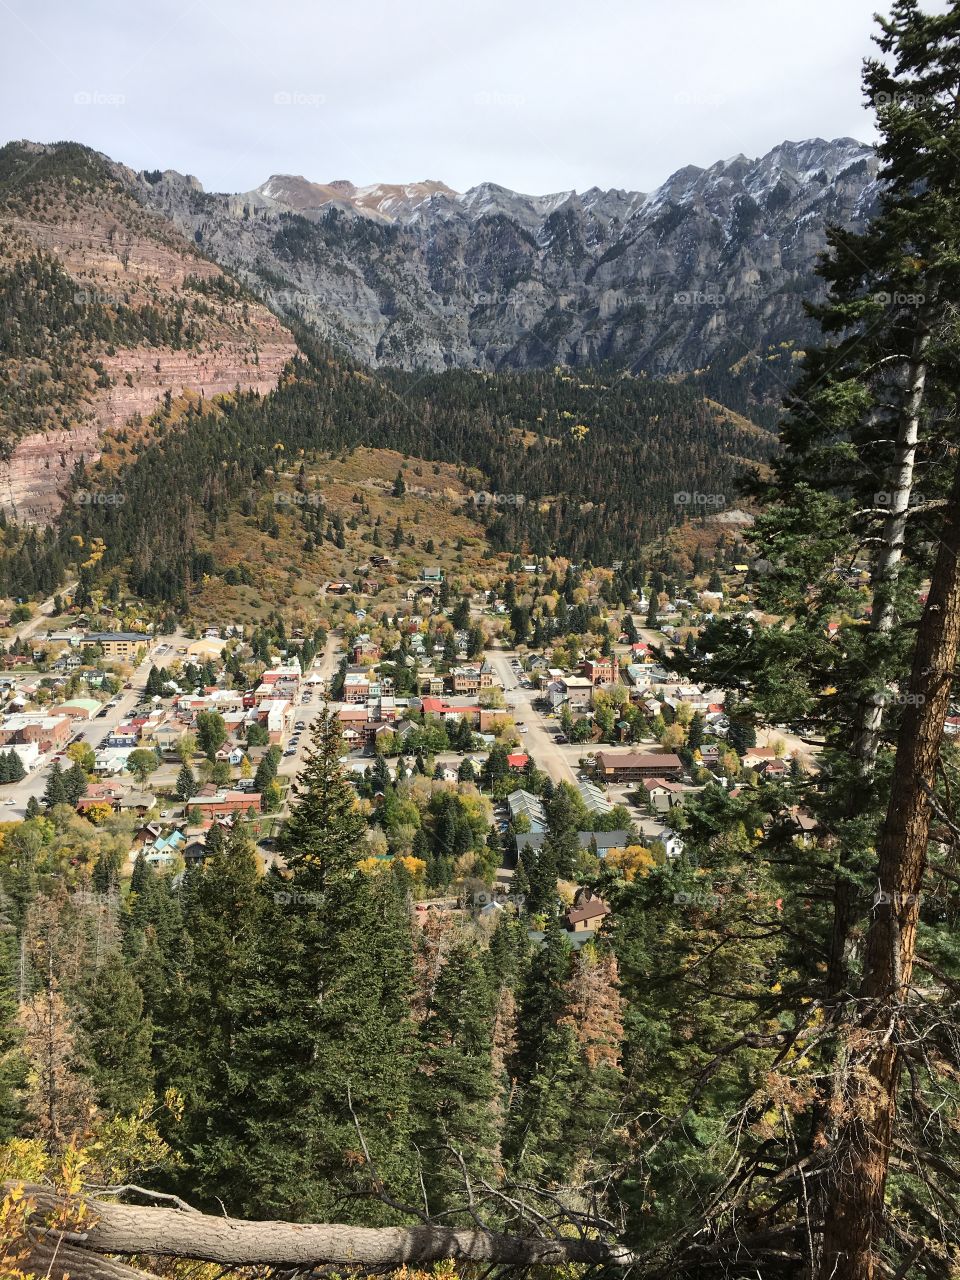 Ouray Overview